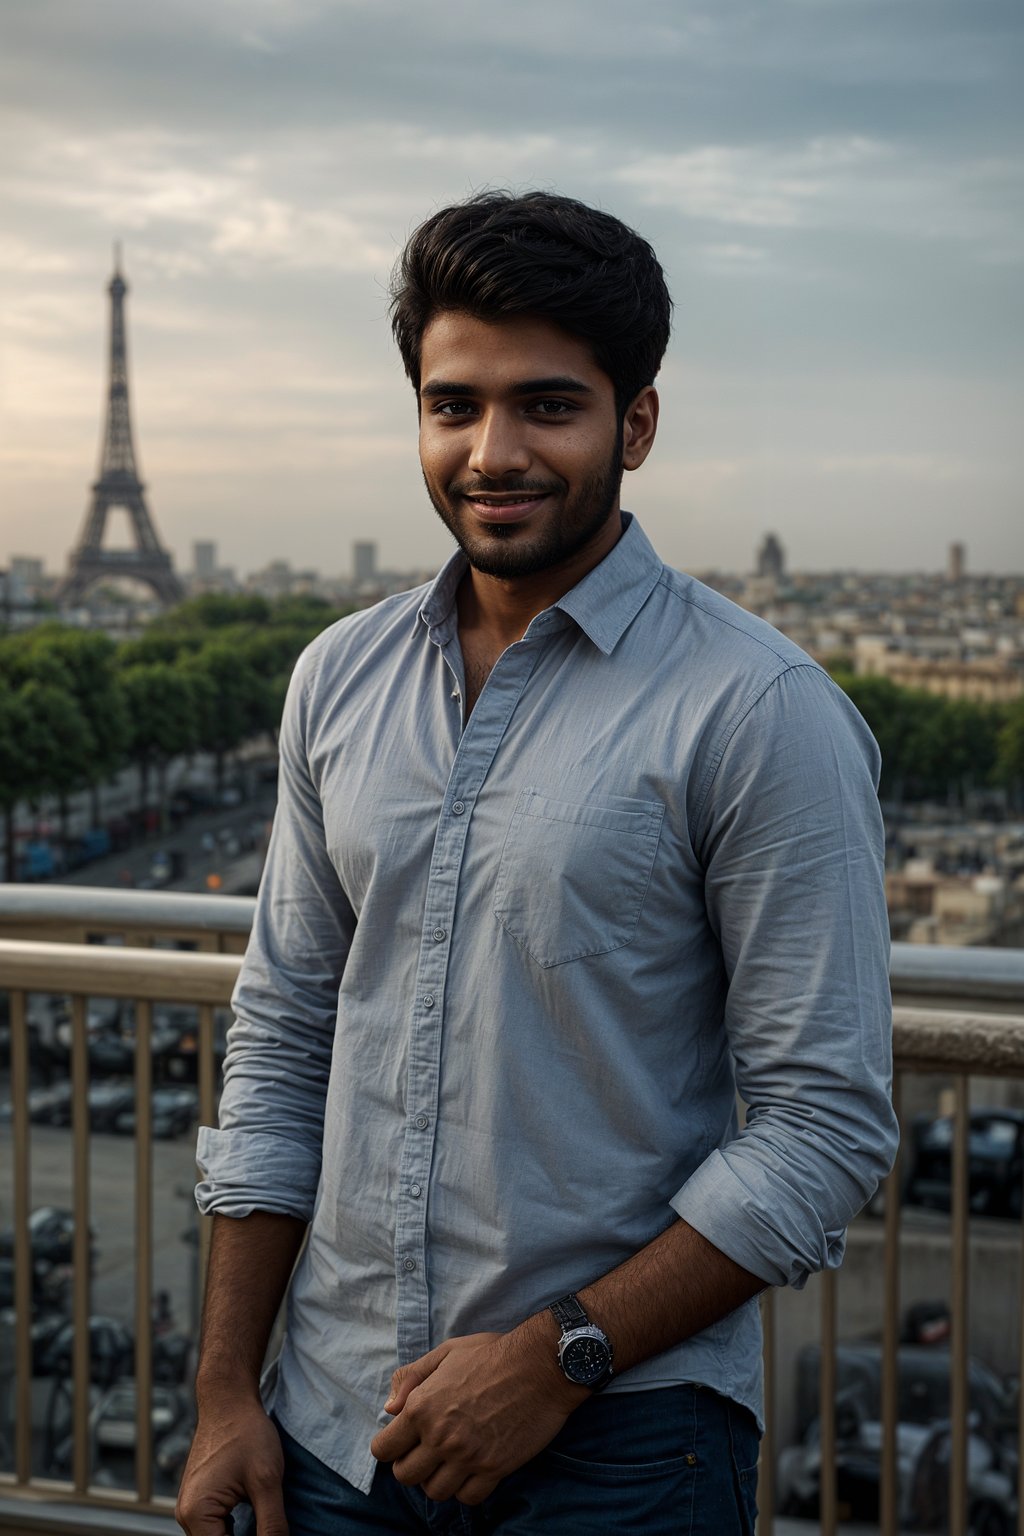 smiling man as digital nomad in Paris with the Eiffel Tower in background